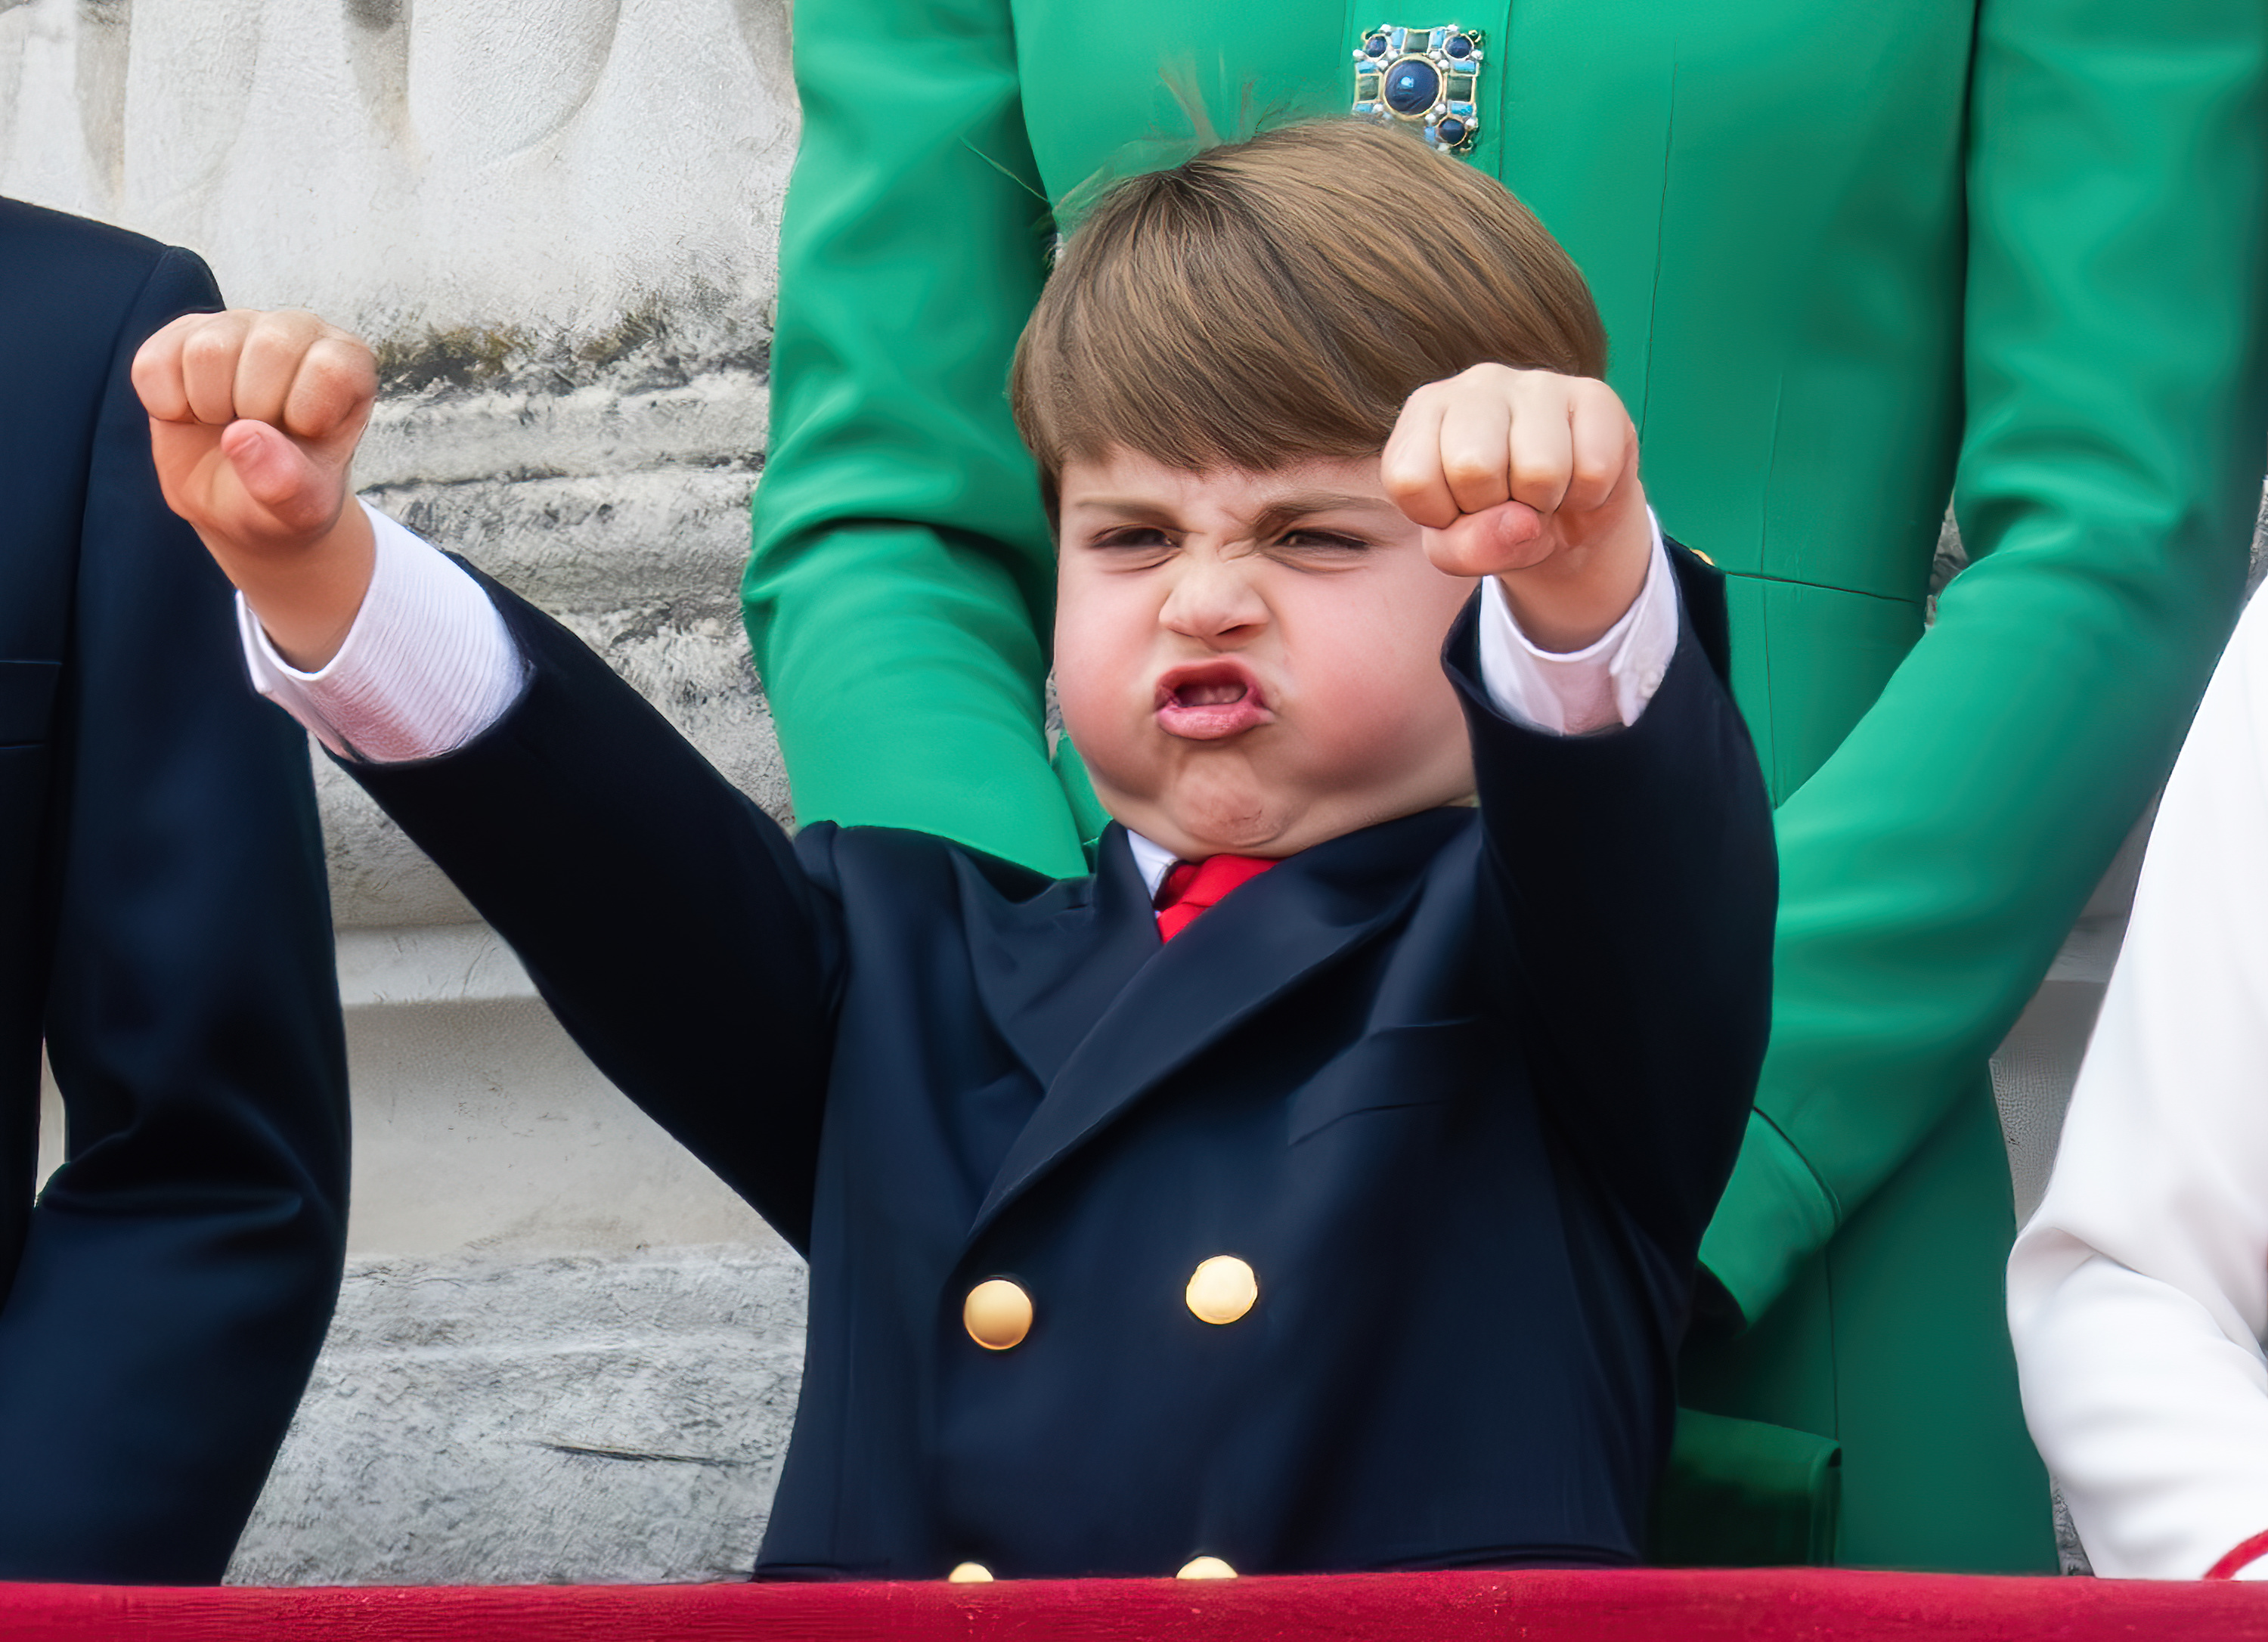 <p><span>Prince Louis made a face on the balcony of Buckingham Palace while watching a Royal Air Force fly-past during </span><a href="https://www.wonderwall.com/celebrity/royals/trooping-the-colour-2023-king-charles-iii-celebrates-the-first-of-his-reign-752078.gallery">Trooping the Colour</a><span> in London on June 17, 2023. </span></p>